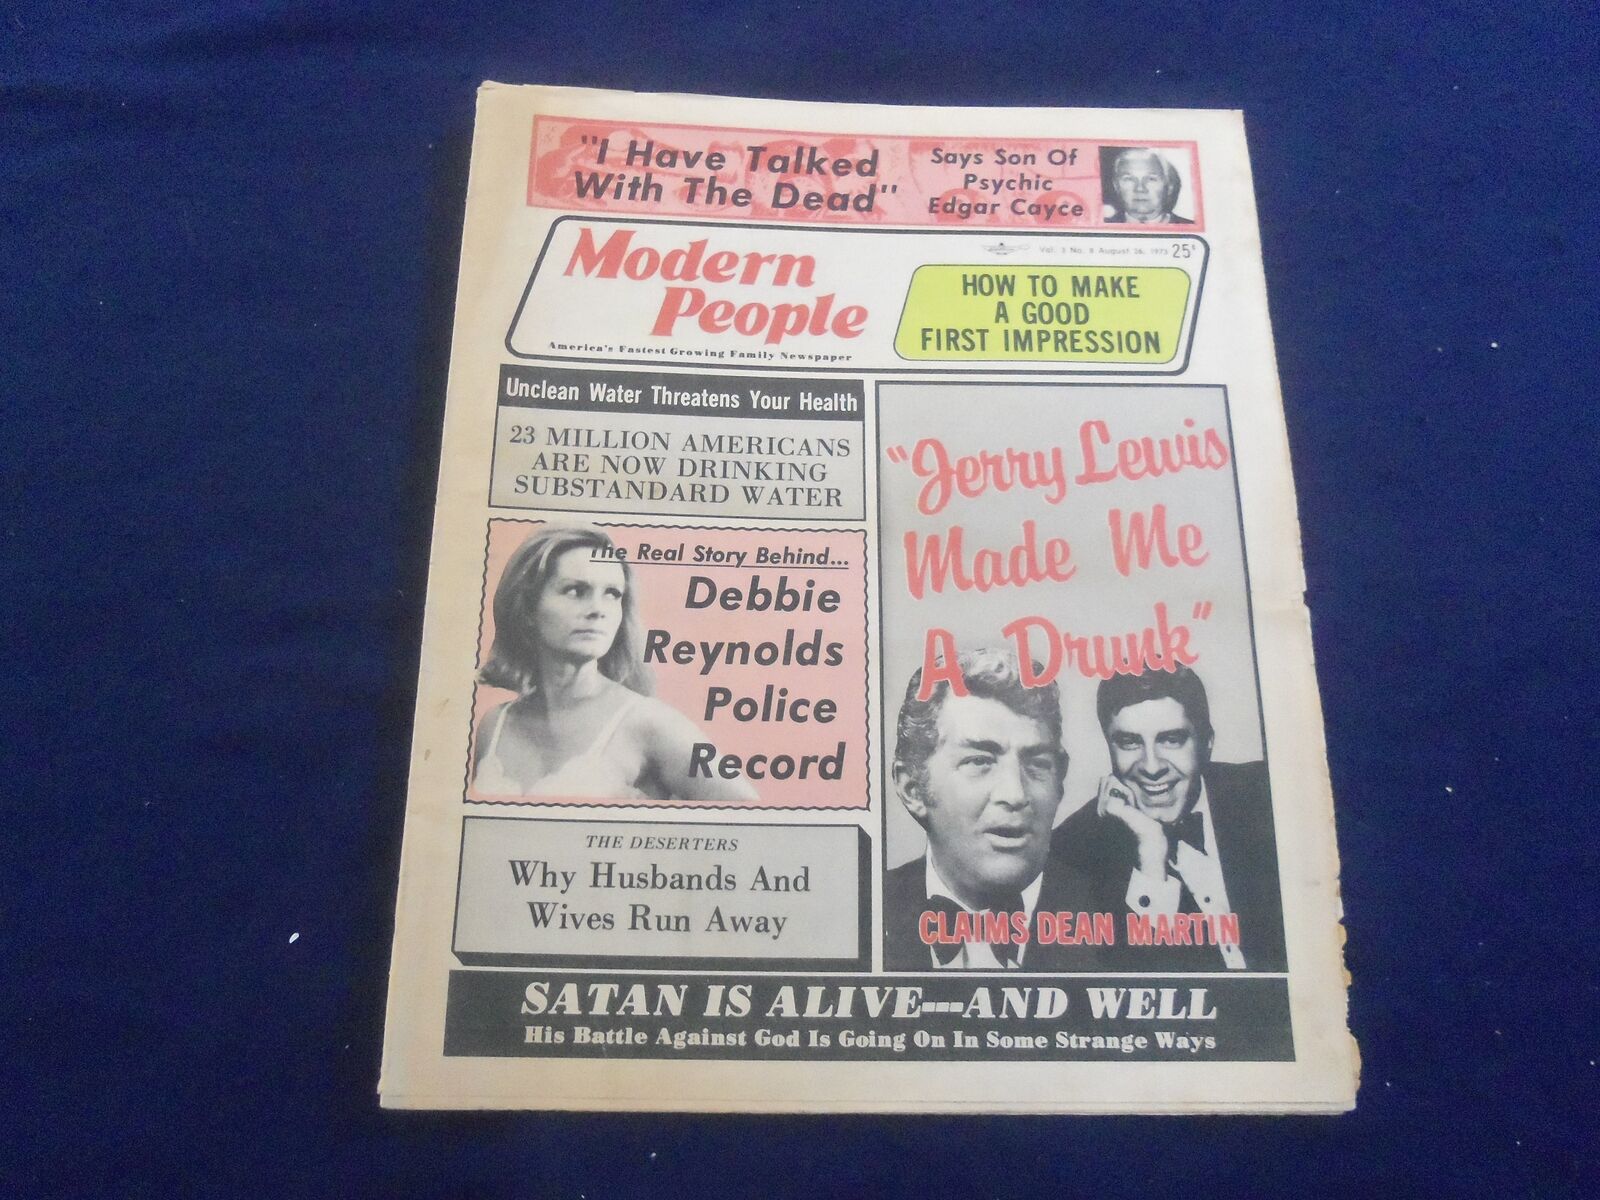 1973 AUGUST 26 MODERN PEOPLE NEWSPAPER - JERRY LEWIS MADE ME A DRUNK - NP 5682